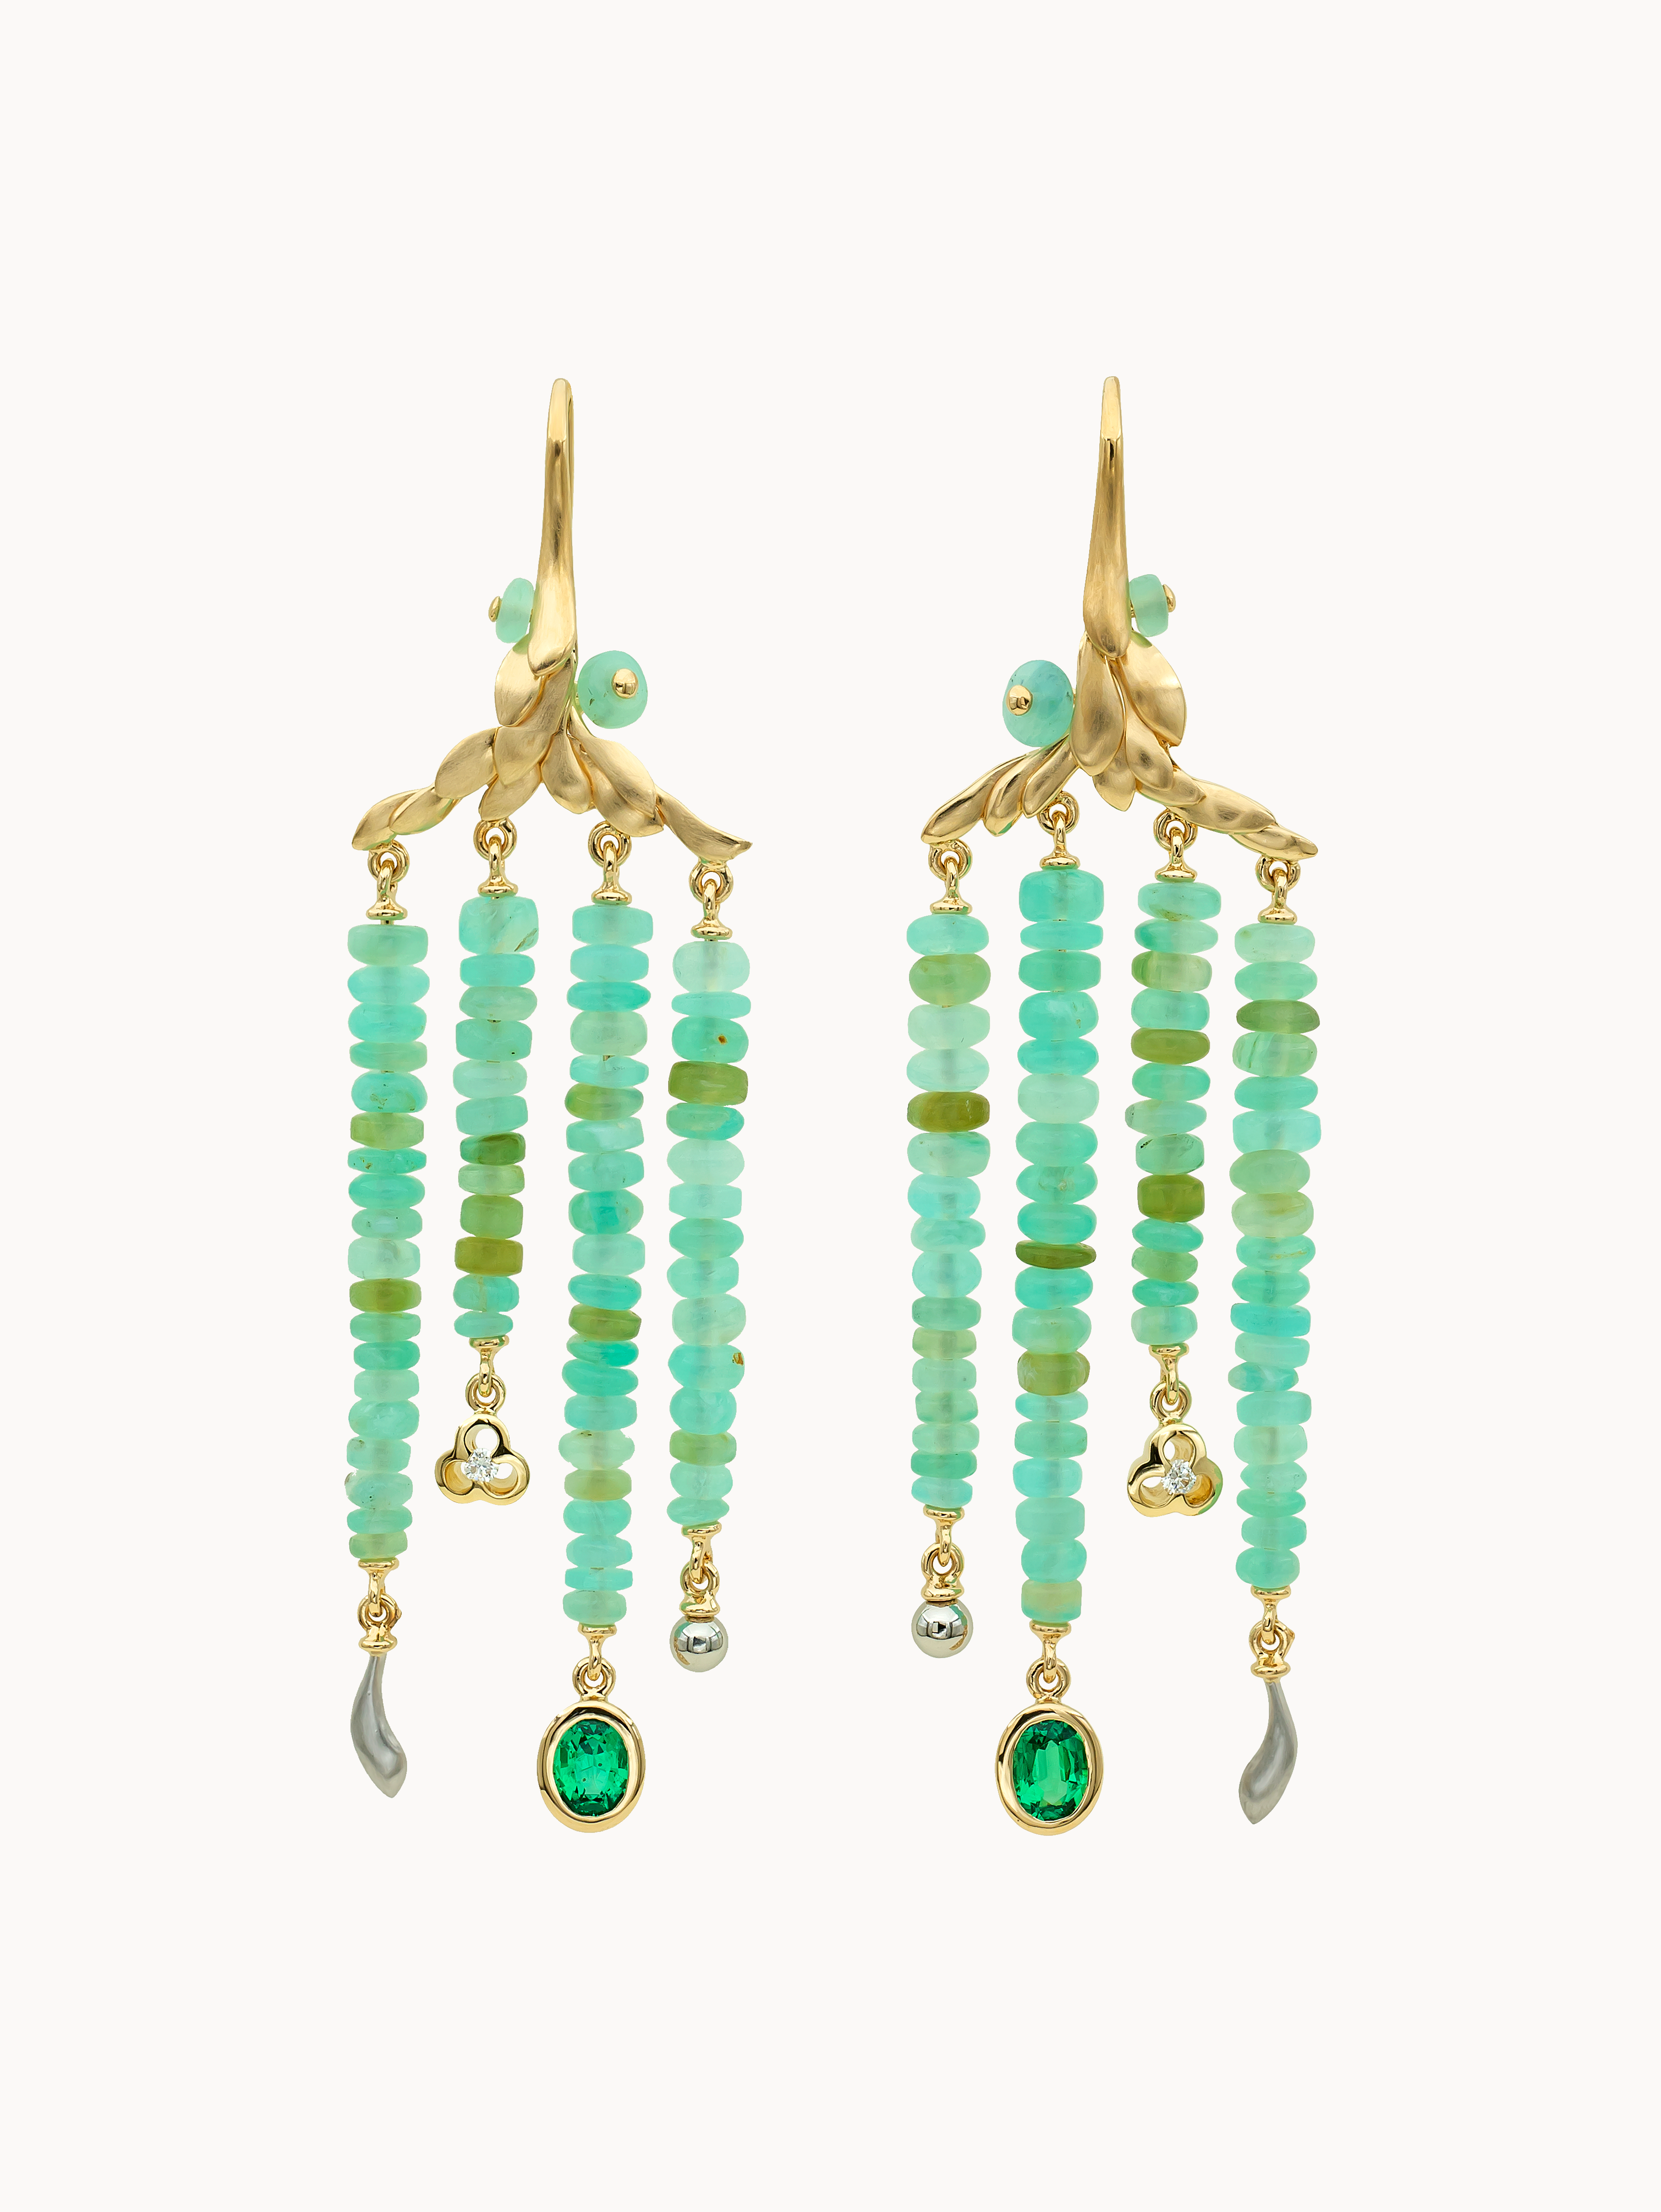 Gioia Collection - Chandelier earrings